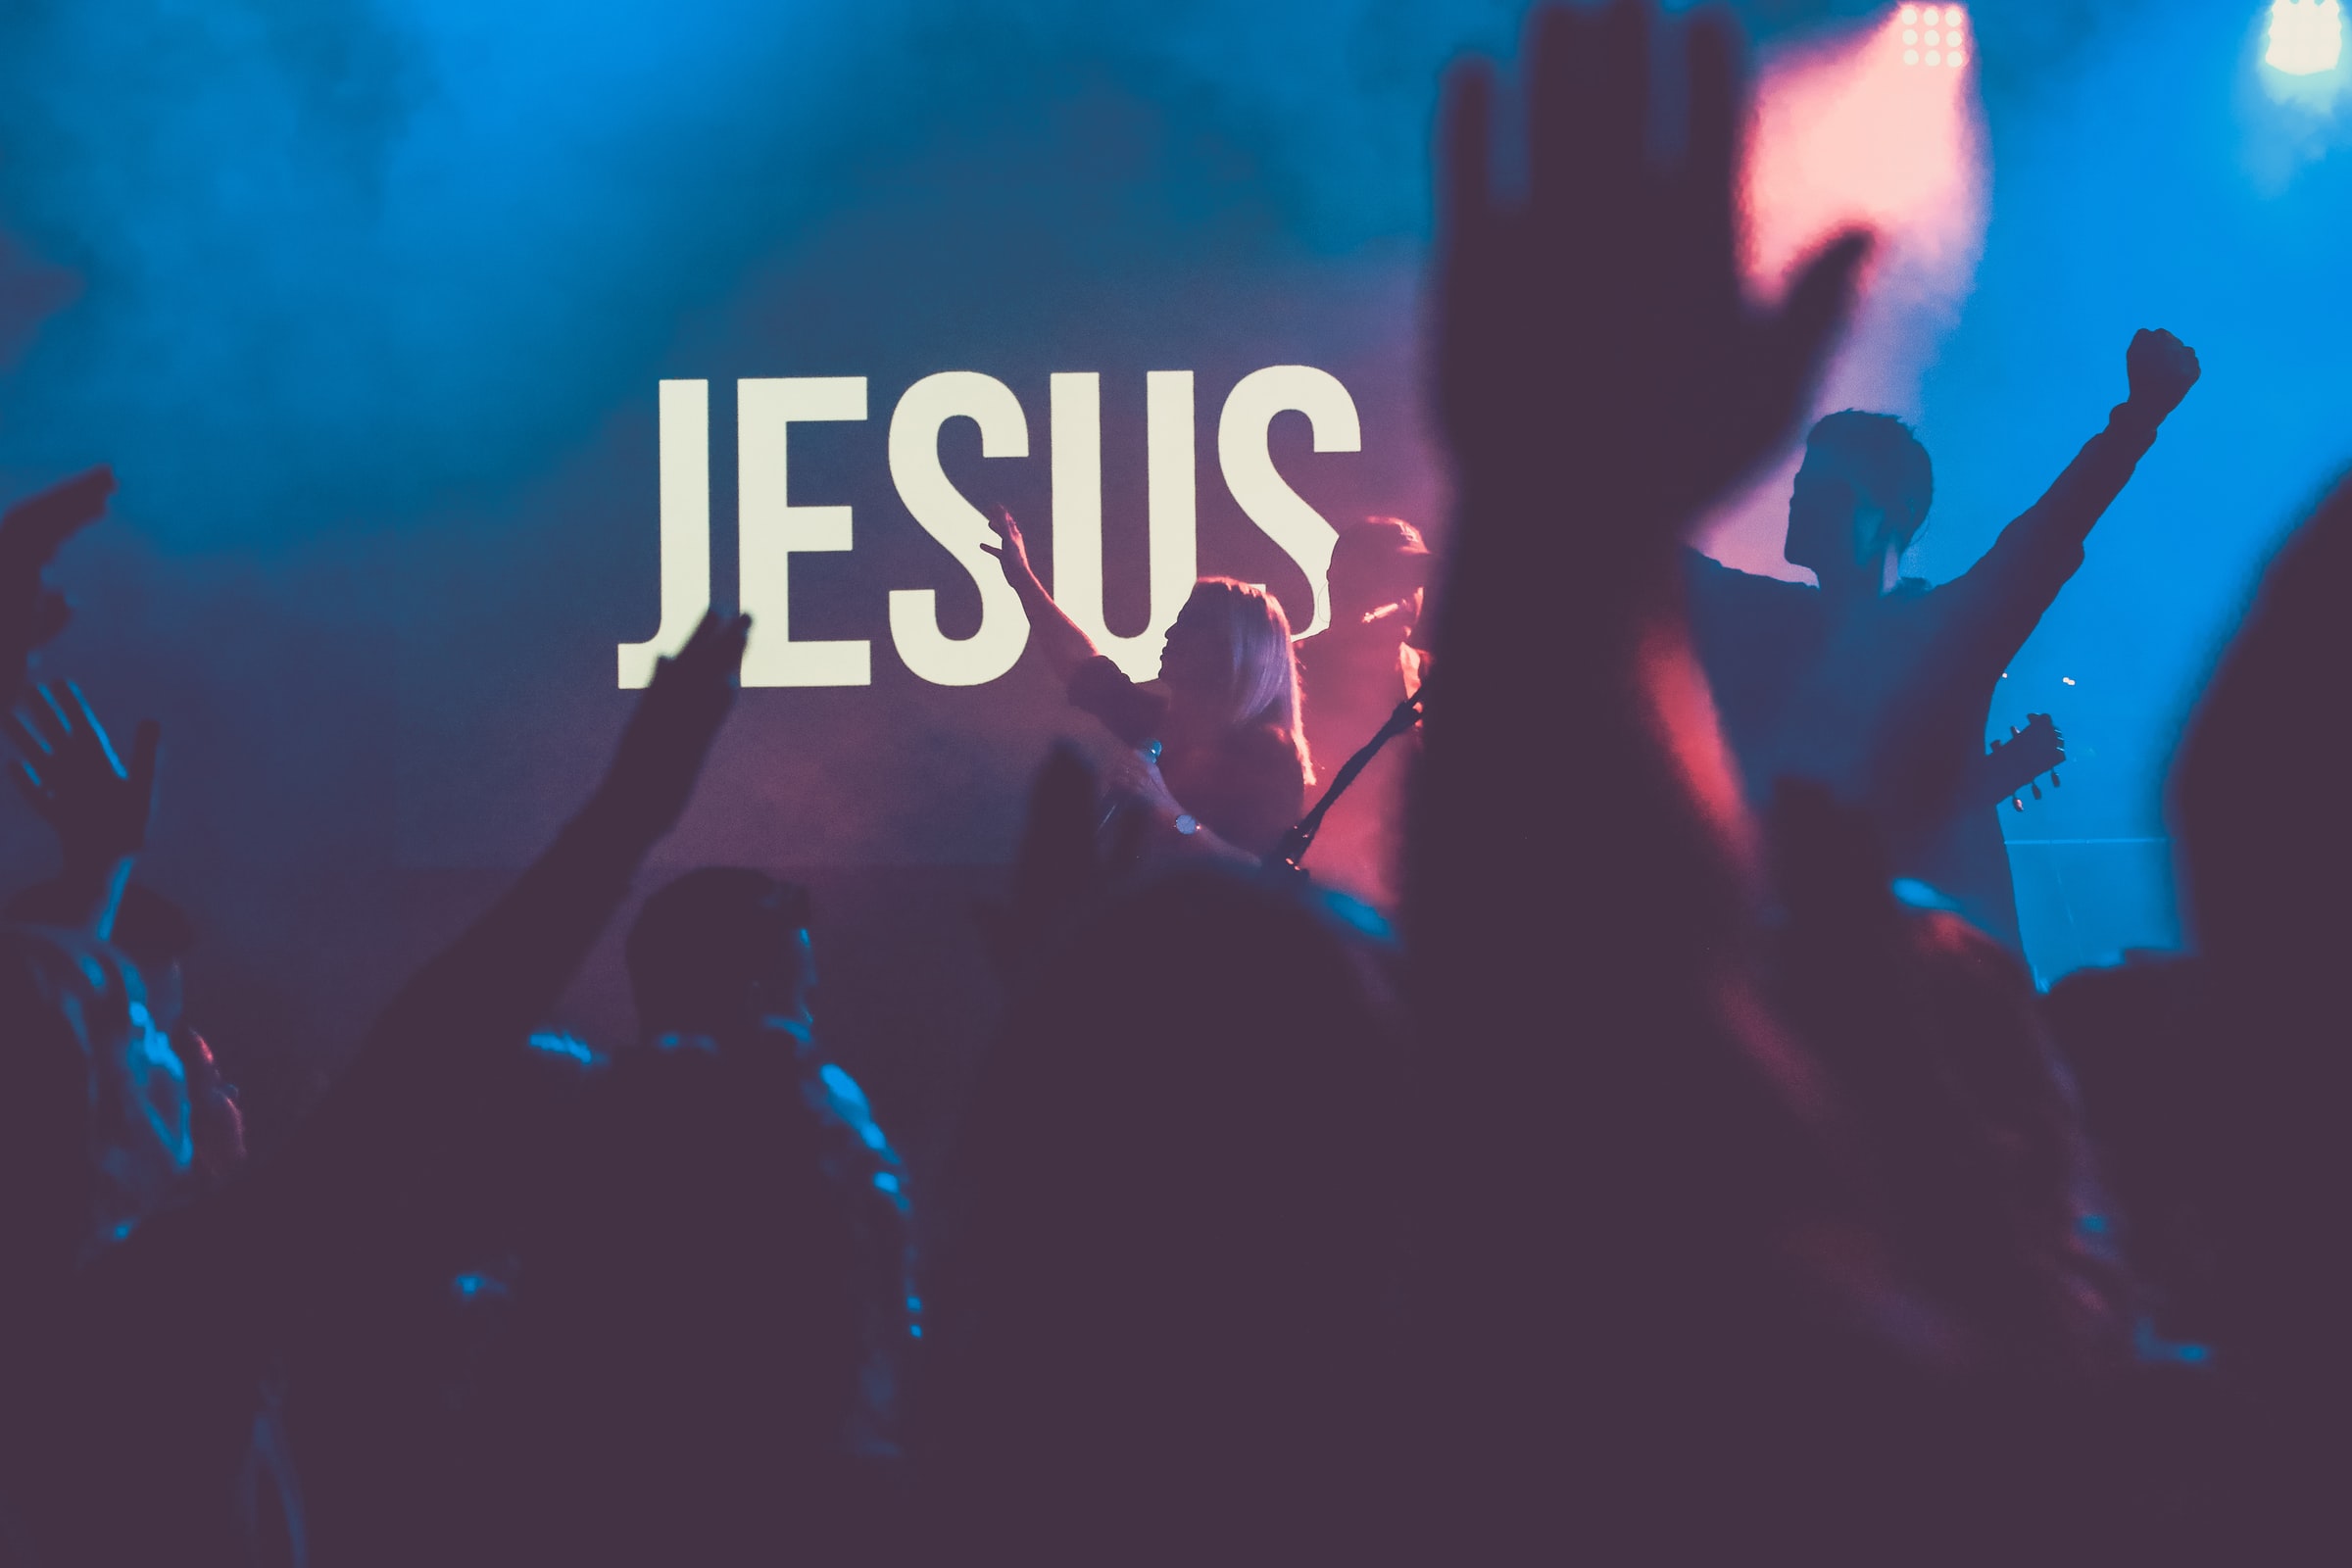 An image of a megachurch service, depicting a crowd of people raising their hands in worship before a sign reading "Jesus" and a Christian rock band performing onstage.